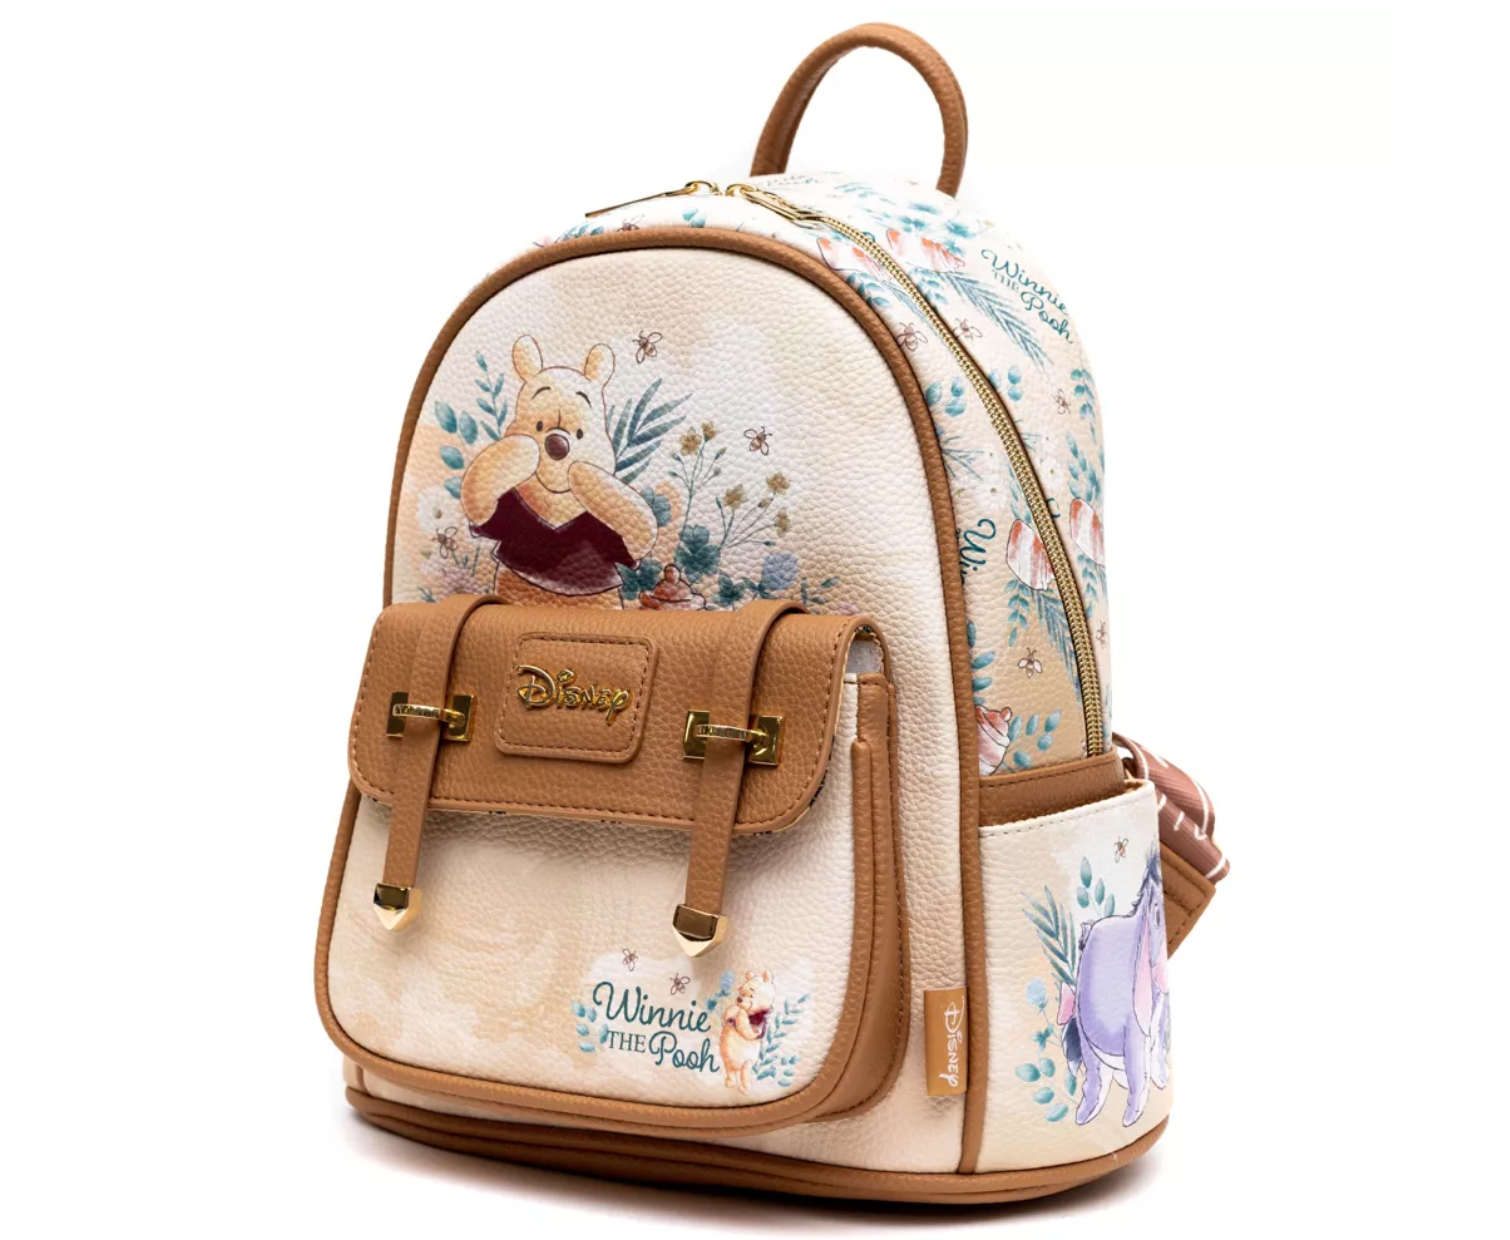 🎒$34 (Reg $50) Loungefly Disney Mini Backpack! Deal ends today (December  28th)! 👆 Find the direct link in my bio OR Go to: 👉�... | Instagram